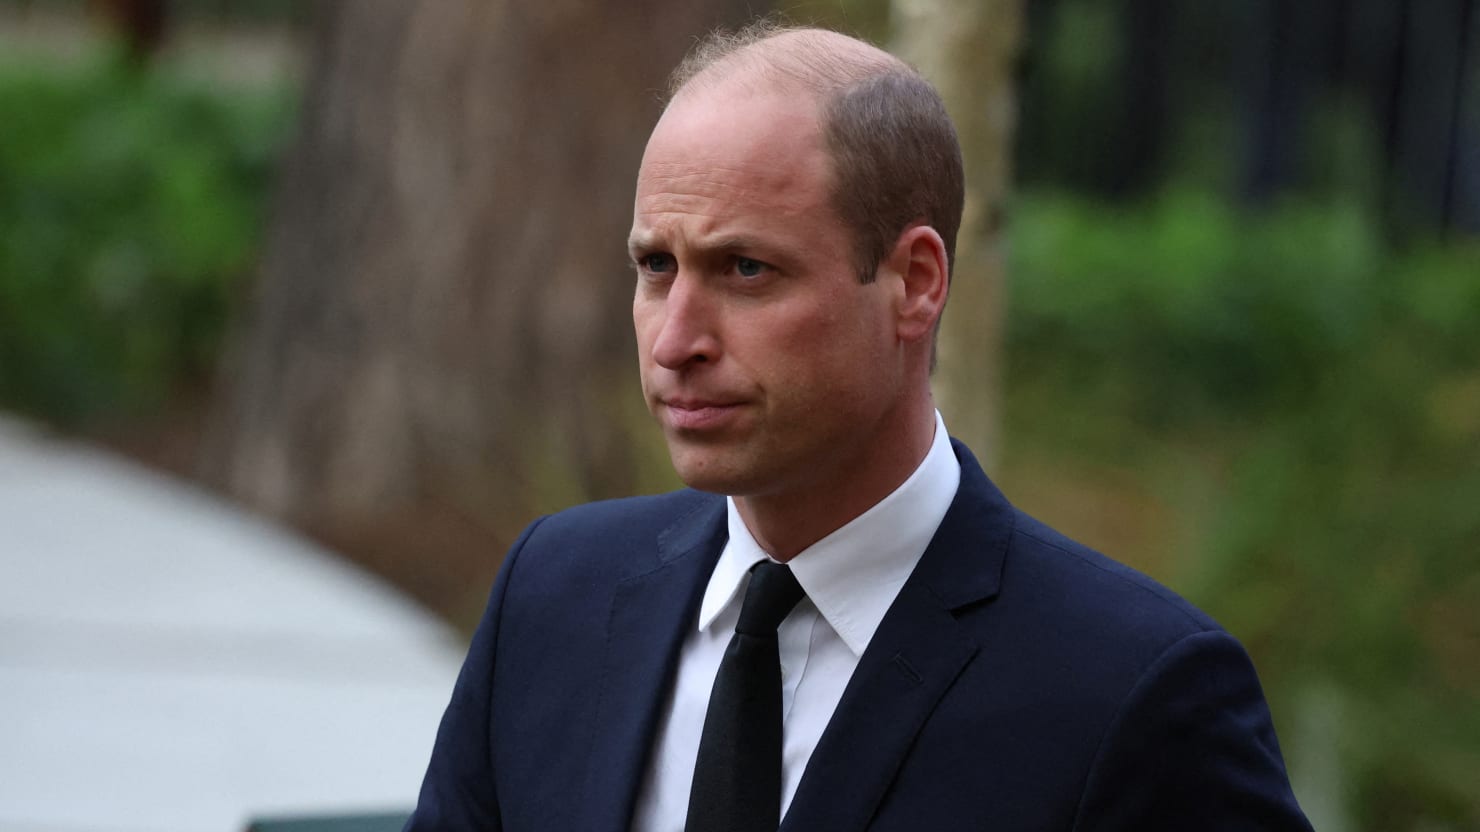 William's last-minute cancellation sparked a new royal health scare